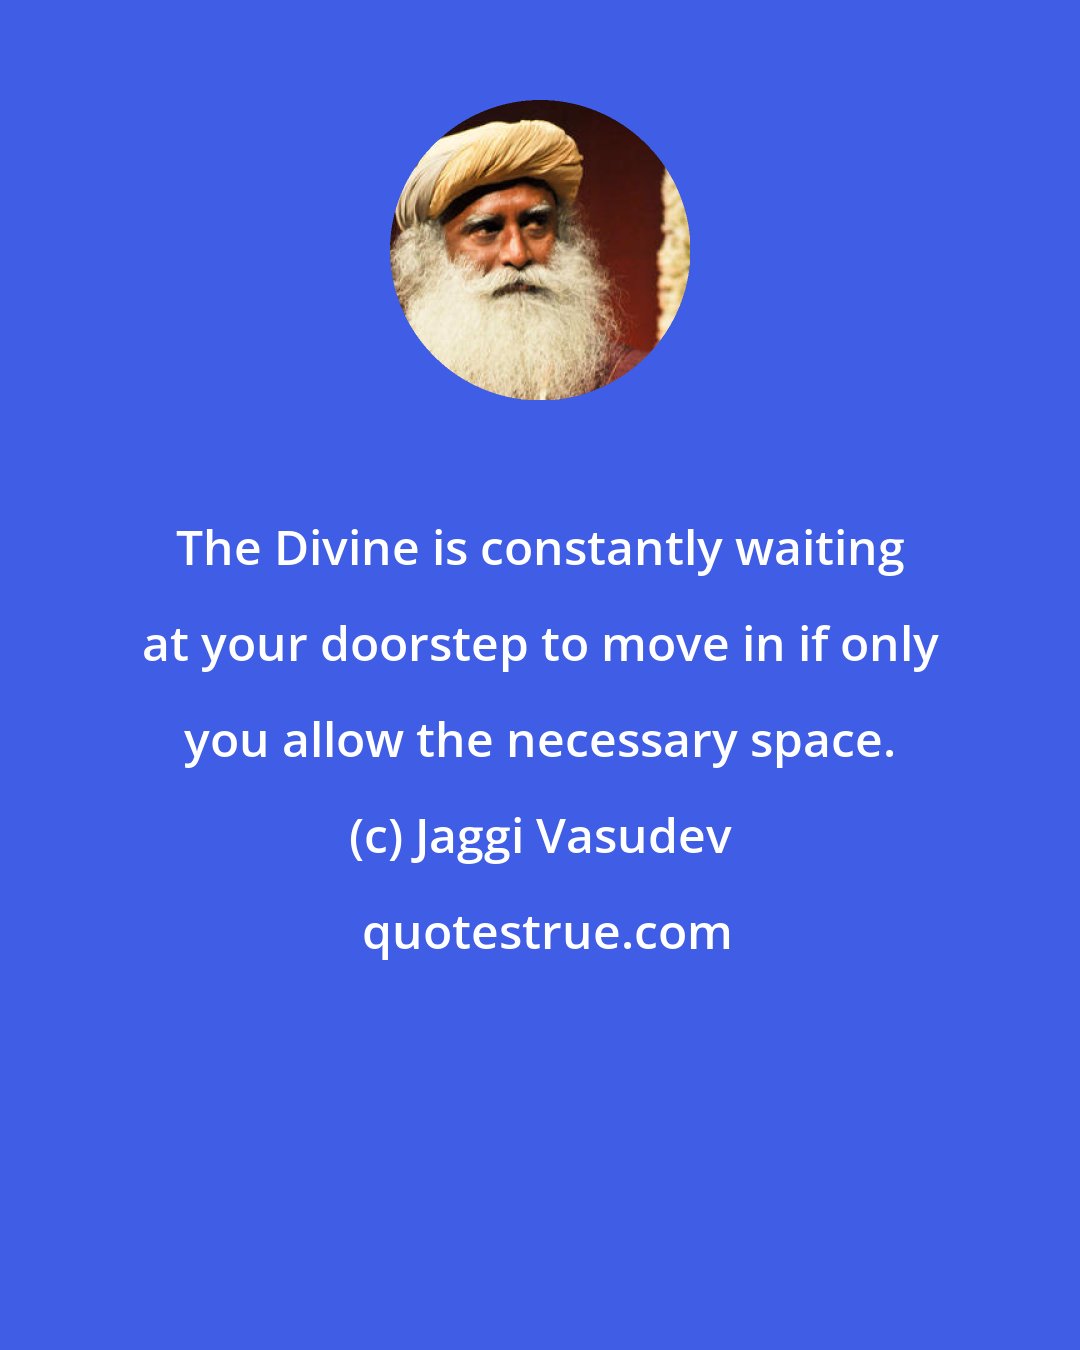 Jaggi Vasudev: The Divine is constantly waiting at your doorstep to move in if only you allow the necessary space.